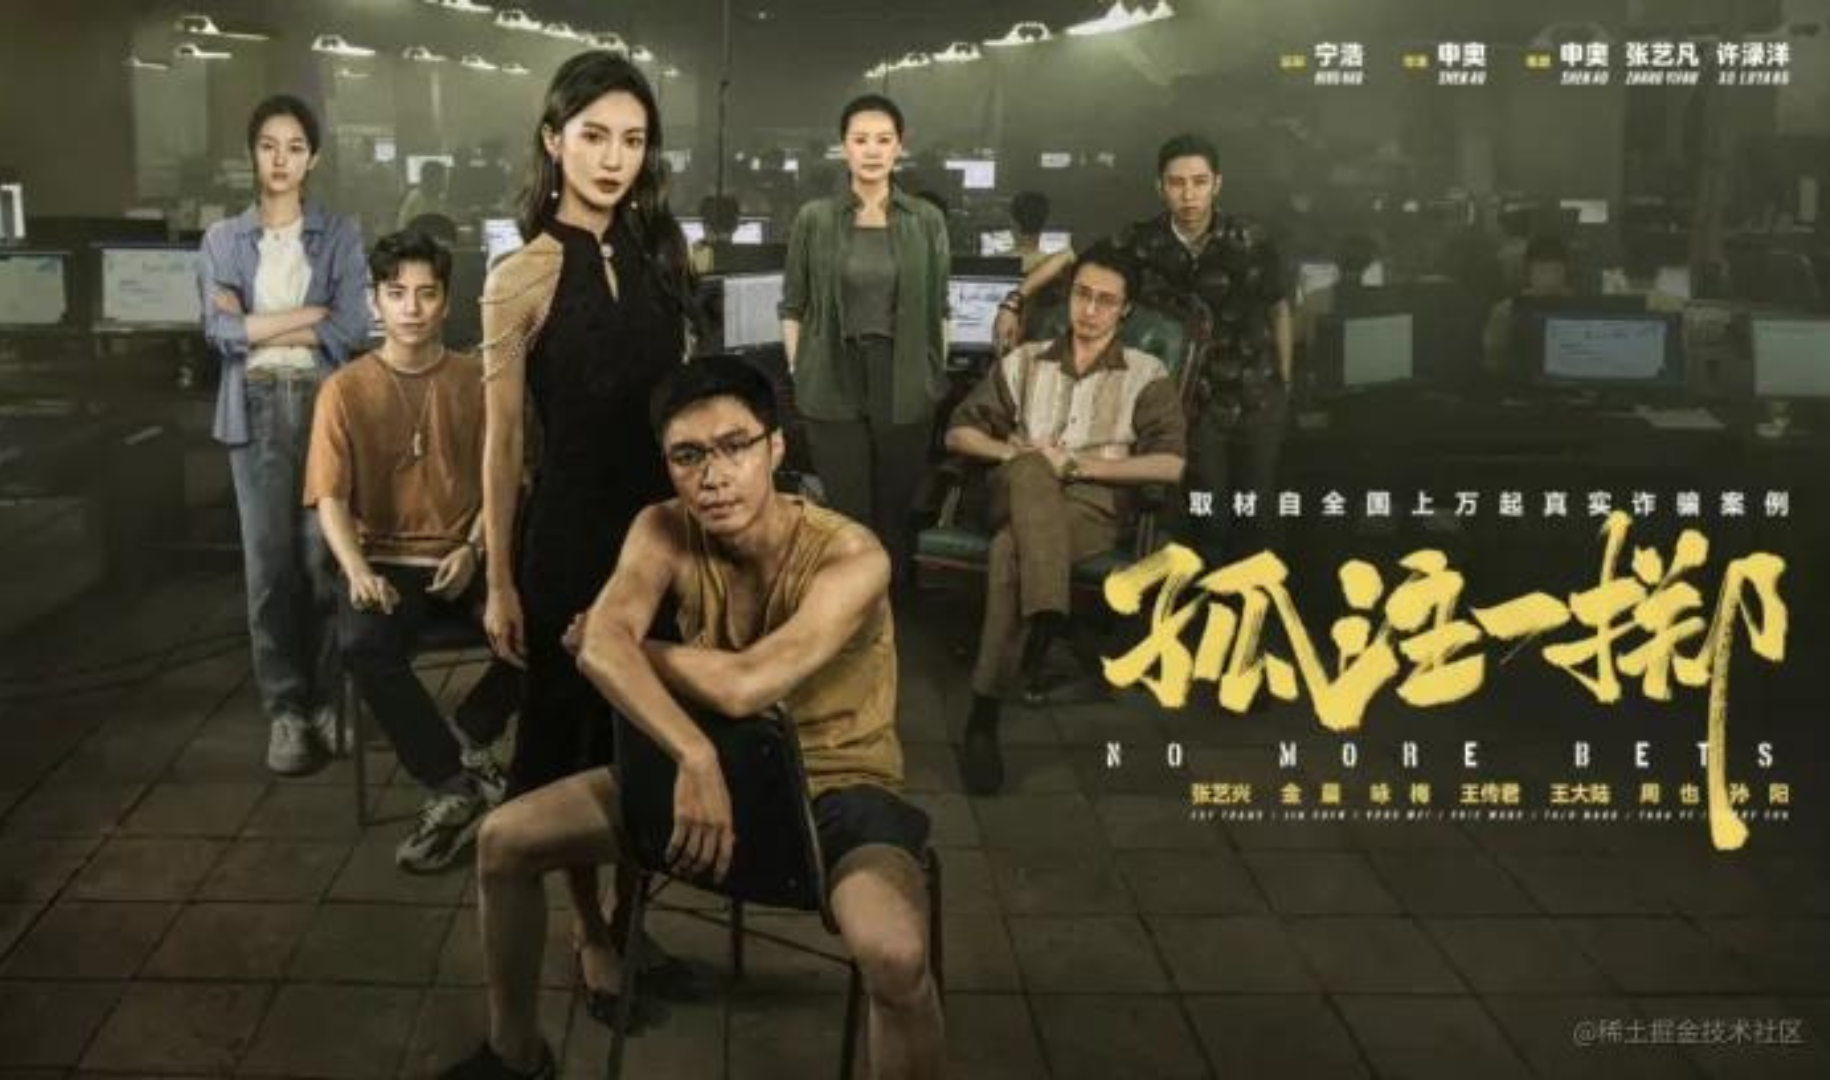 The film is now set to smash the international box office as it's dubbed as China's new runaway film.